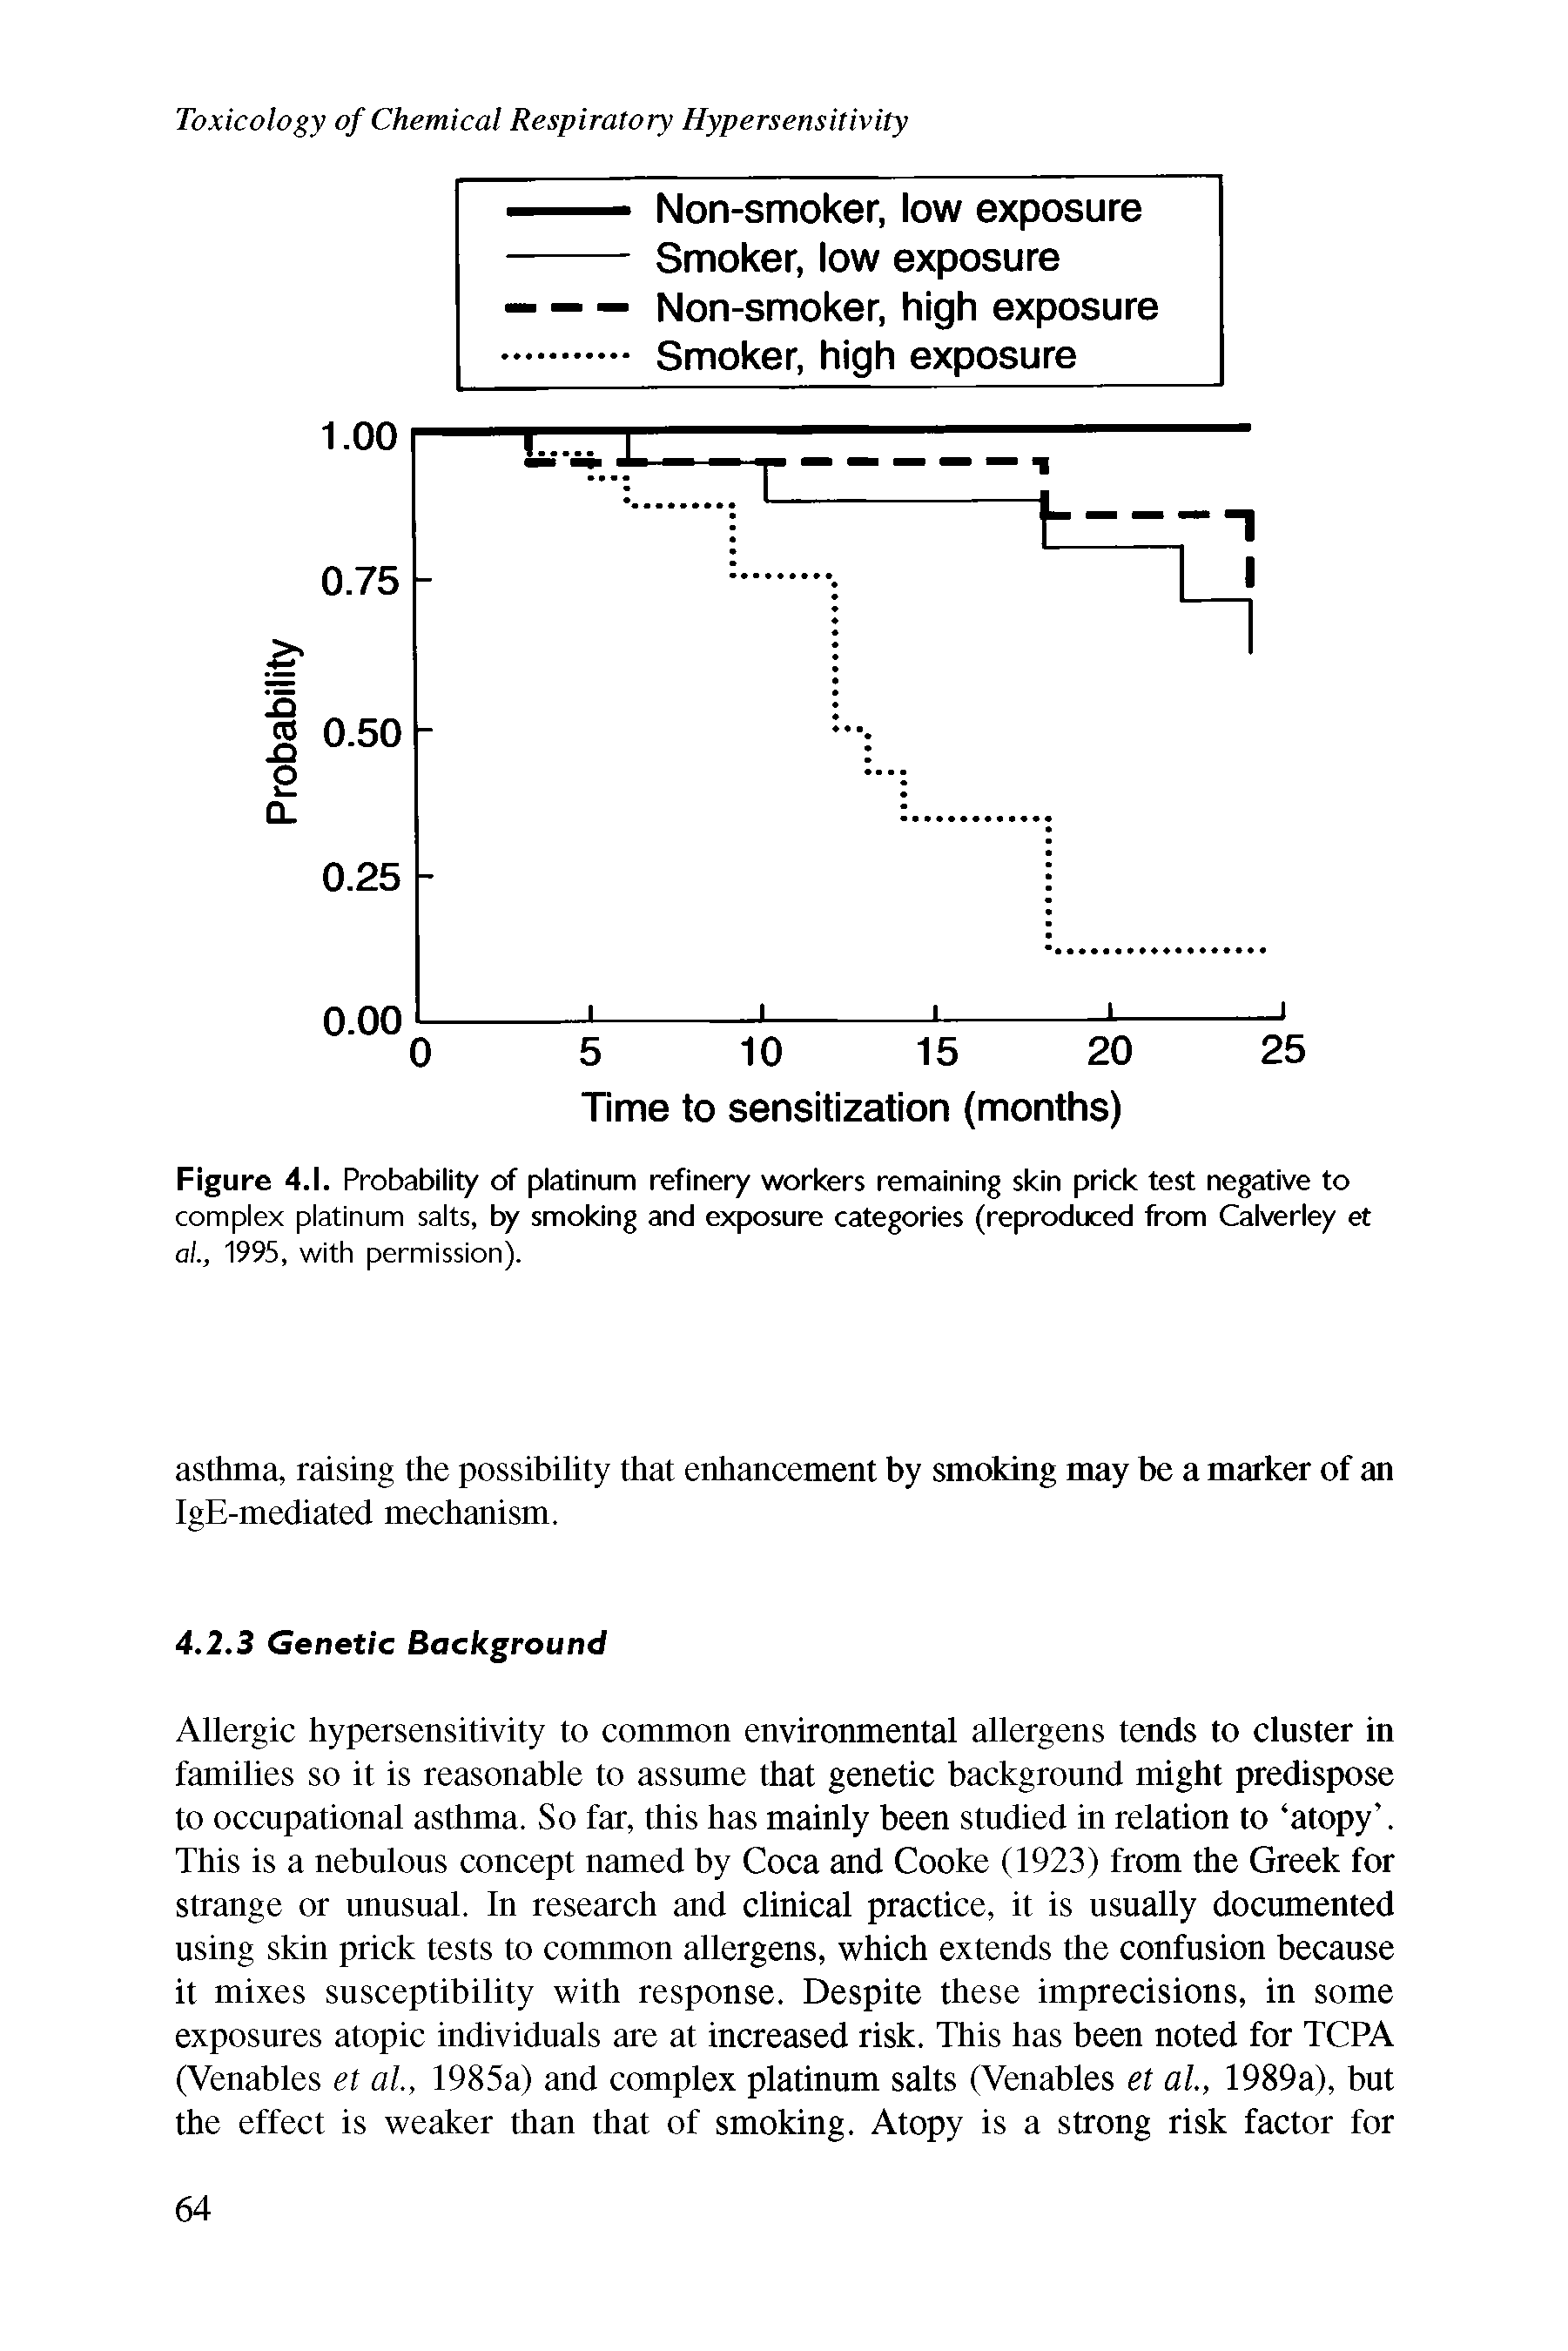 Figure 4.1. Probability of platinum refinery workers remaining skin prick test negative to complex platinum salts, by smoking and exposure categories (reproduced from Calverley et a., 1995, with permission).